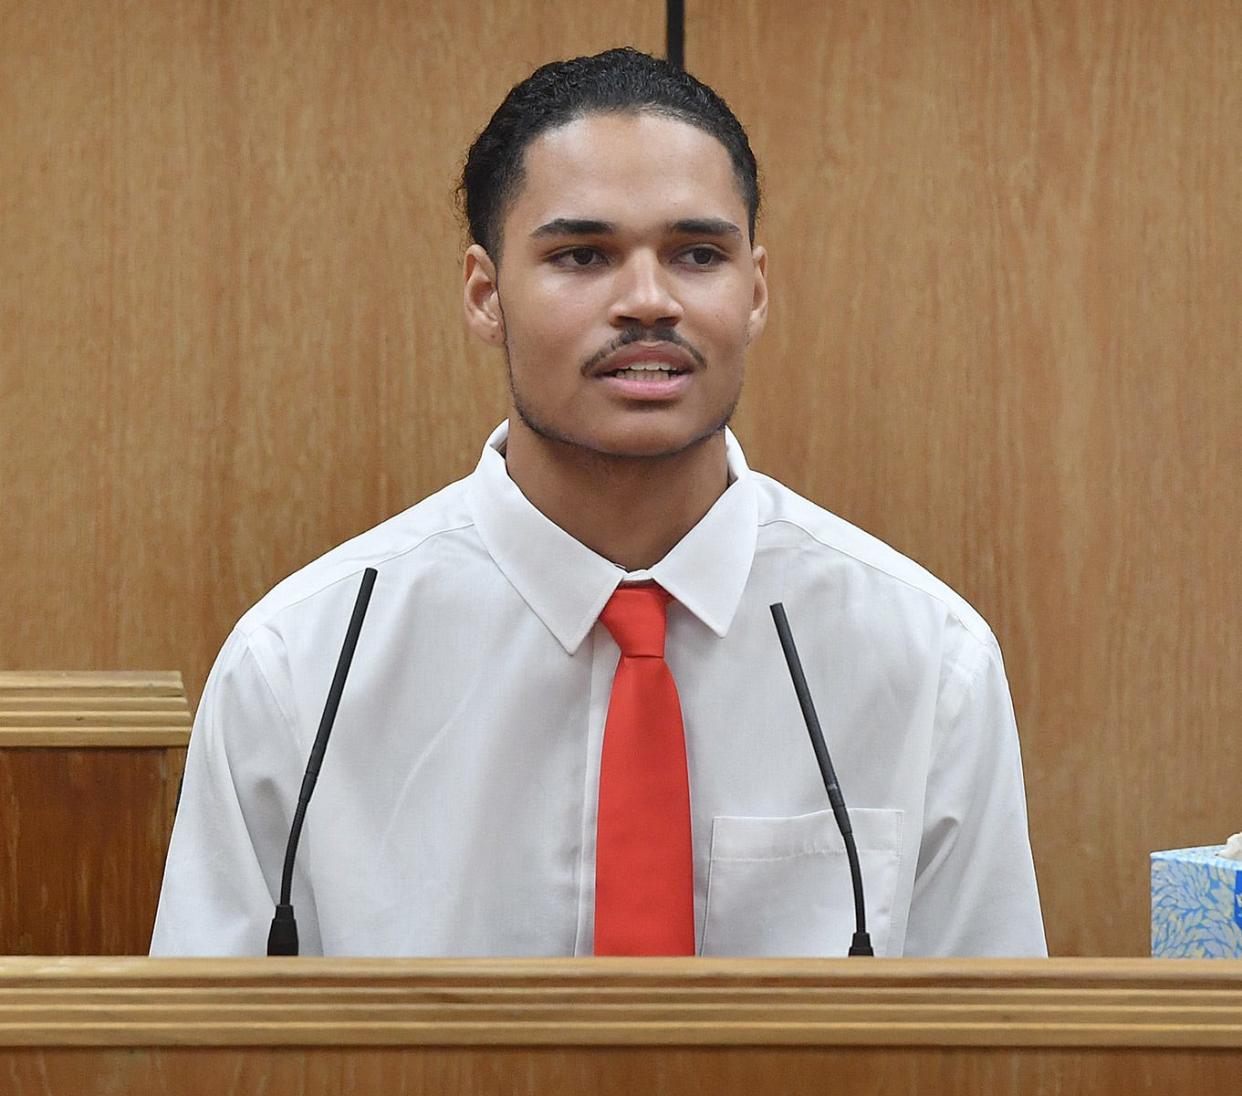 A jury convicted Martez Vrana of capital murder Wednesday. The former high school quarterback was sentenced to life without parole.